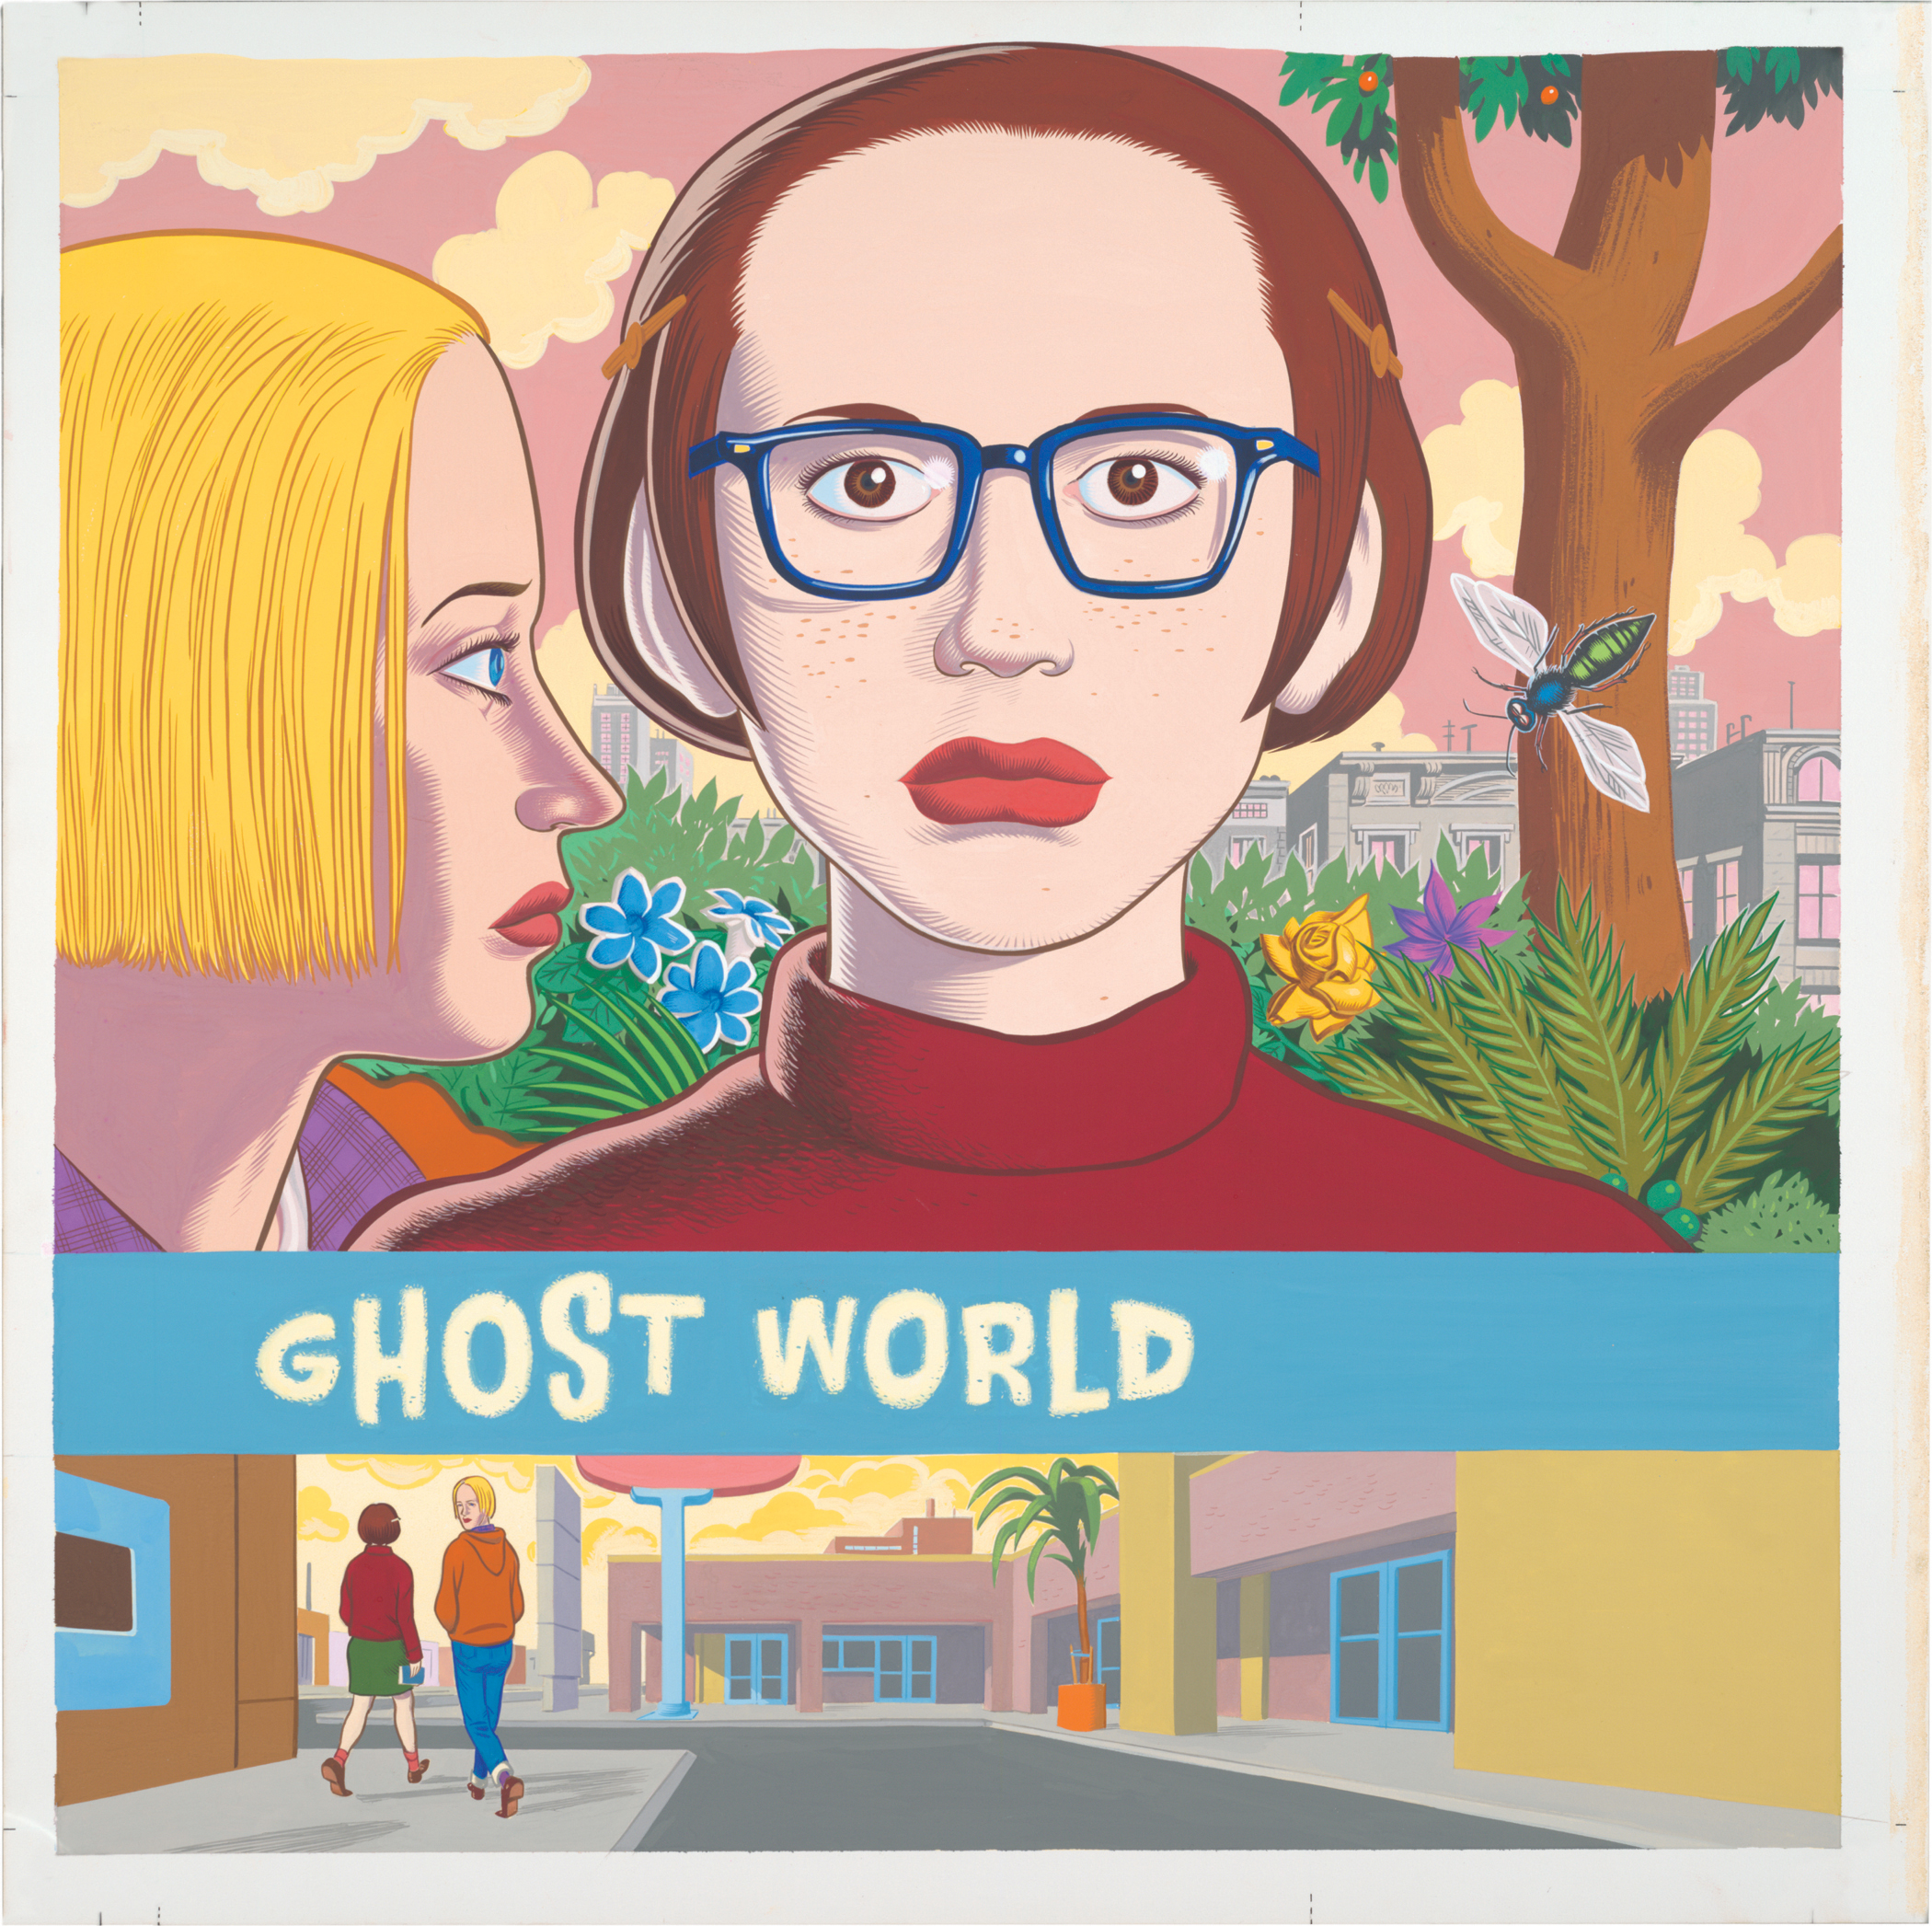 Daniel Clowes, Ghost World (cover), 1997. Collection of Daniel Clowes. - f653eClowes_GhostWorldcover